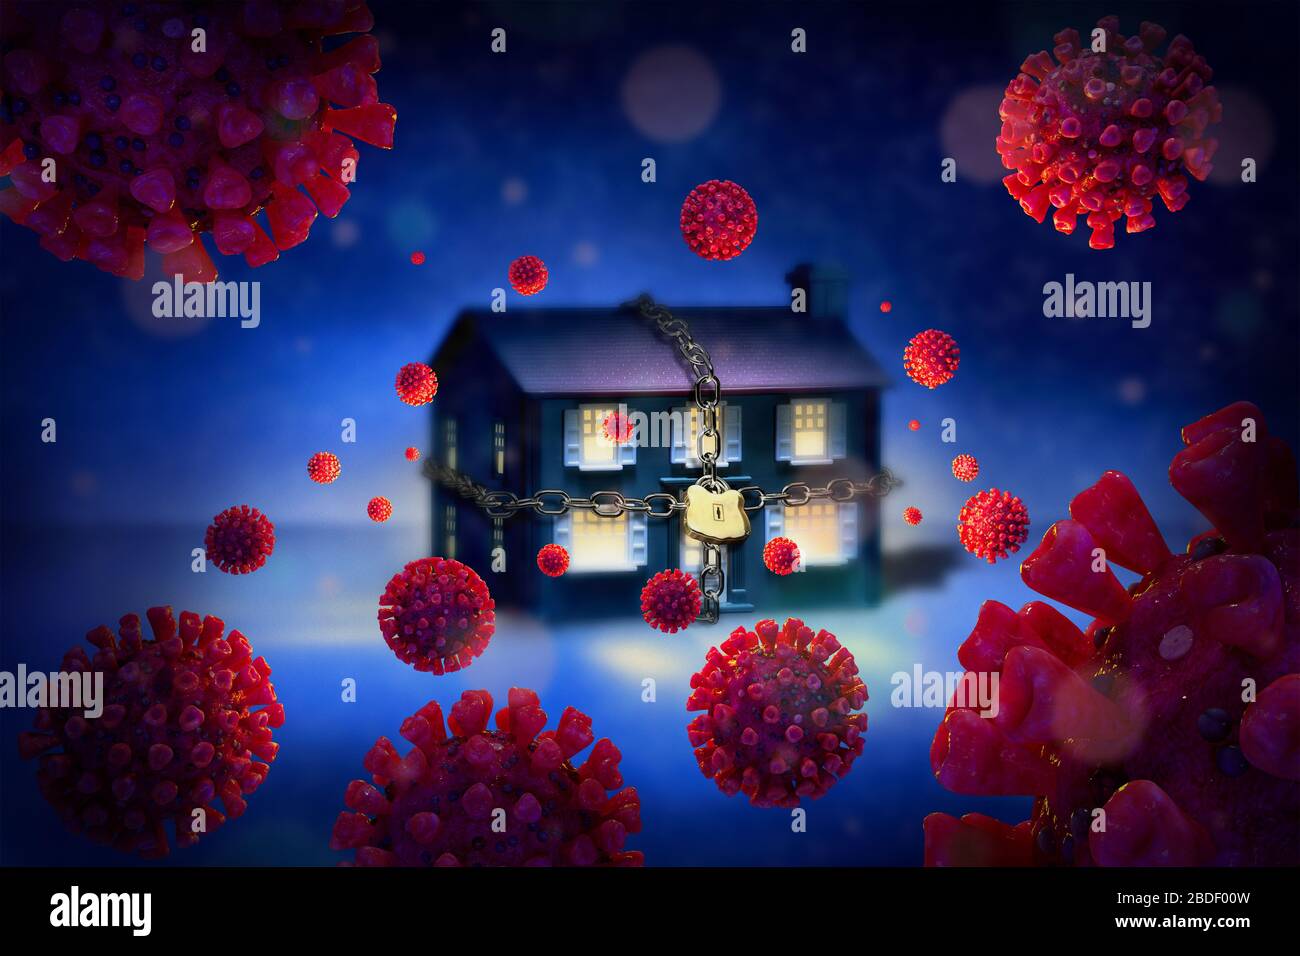 Digitally generated image of chained up house surrounded withÂ Coronaviruses Stock Photo